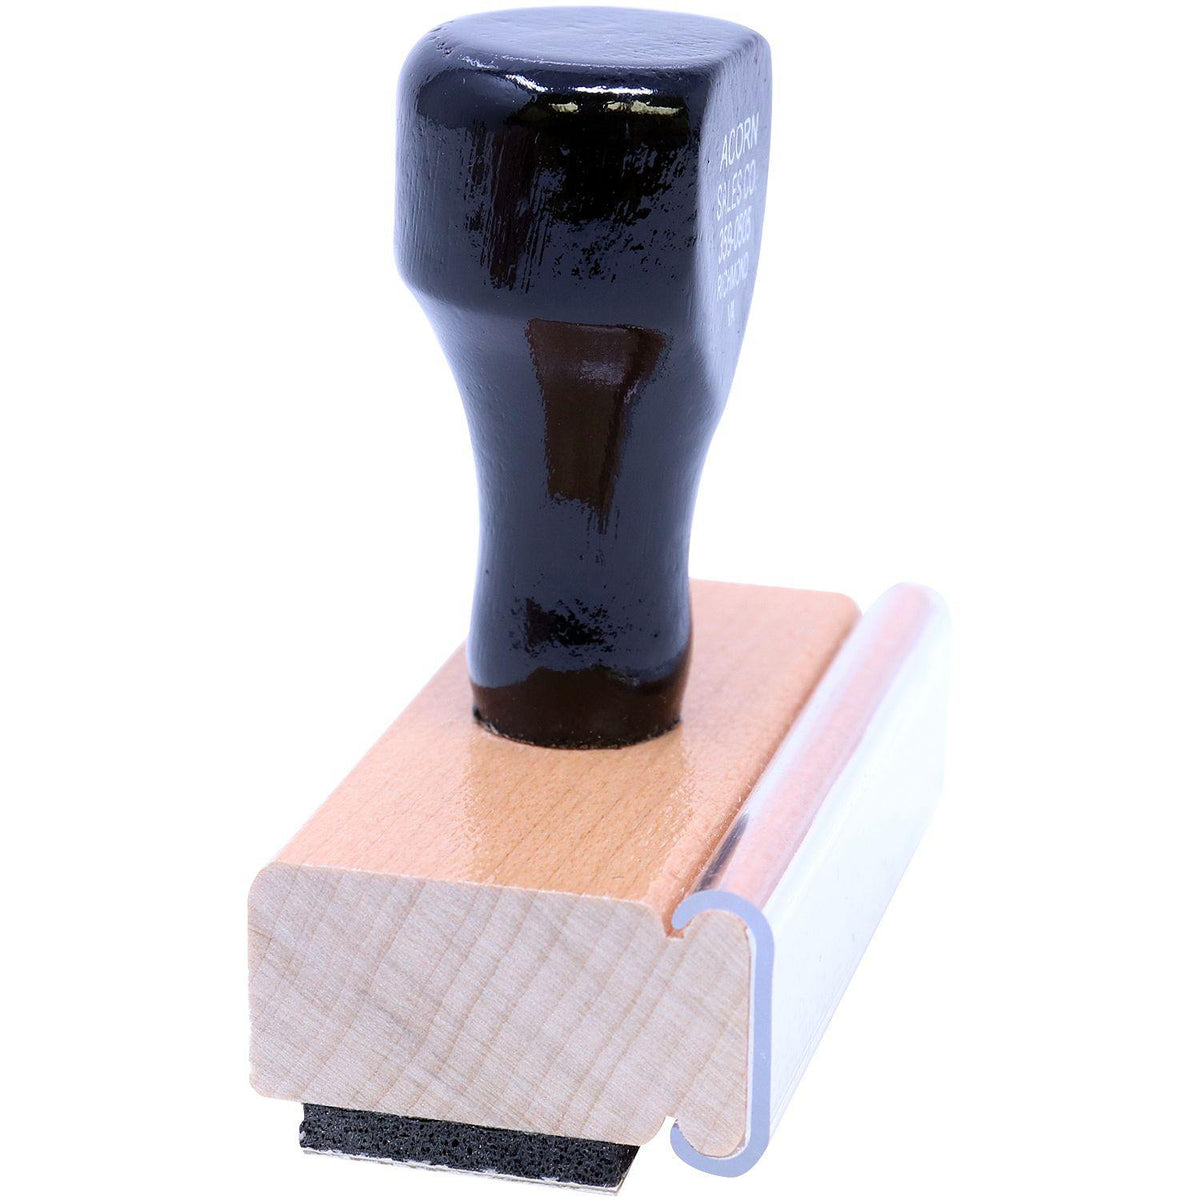 Side View of Large Scanned with Line Rubber Stamp at an Angle